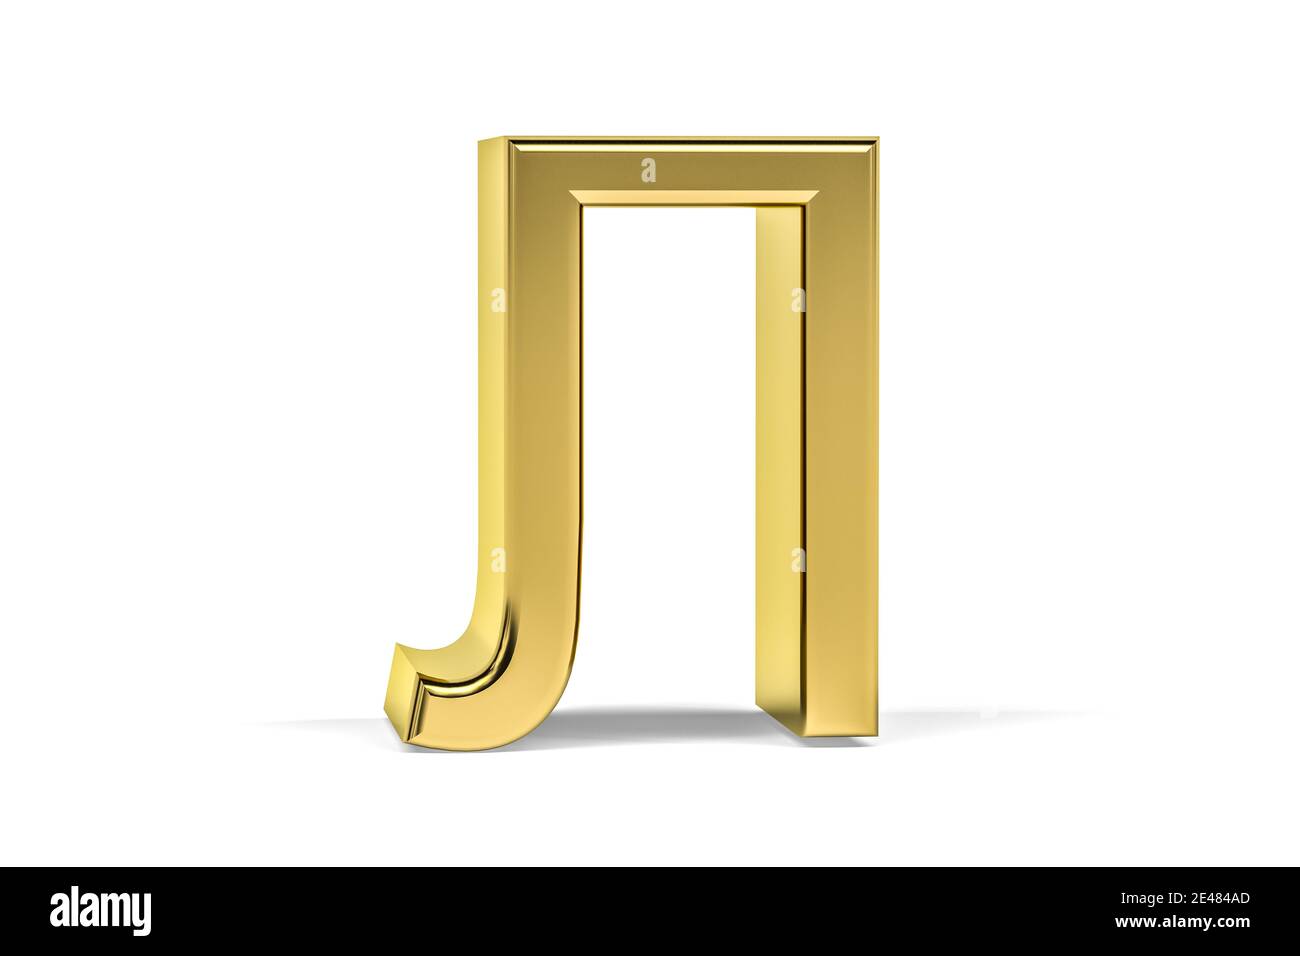 Golden Russian letter - three dimensional Russian letter written in  Cyrillic - Translation: "L" letter - 3d render Stock Photo - Alamy